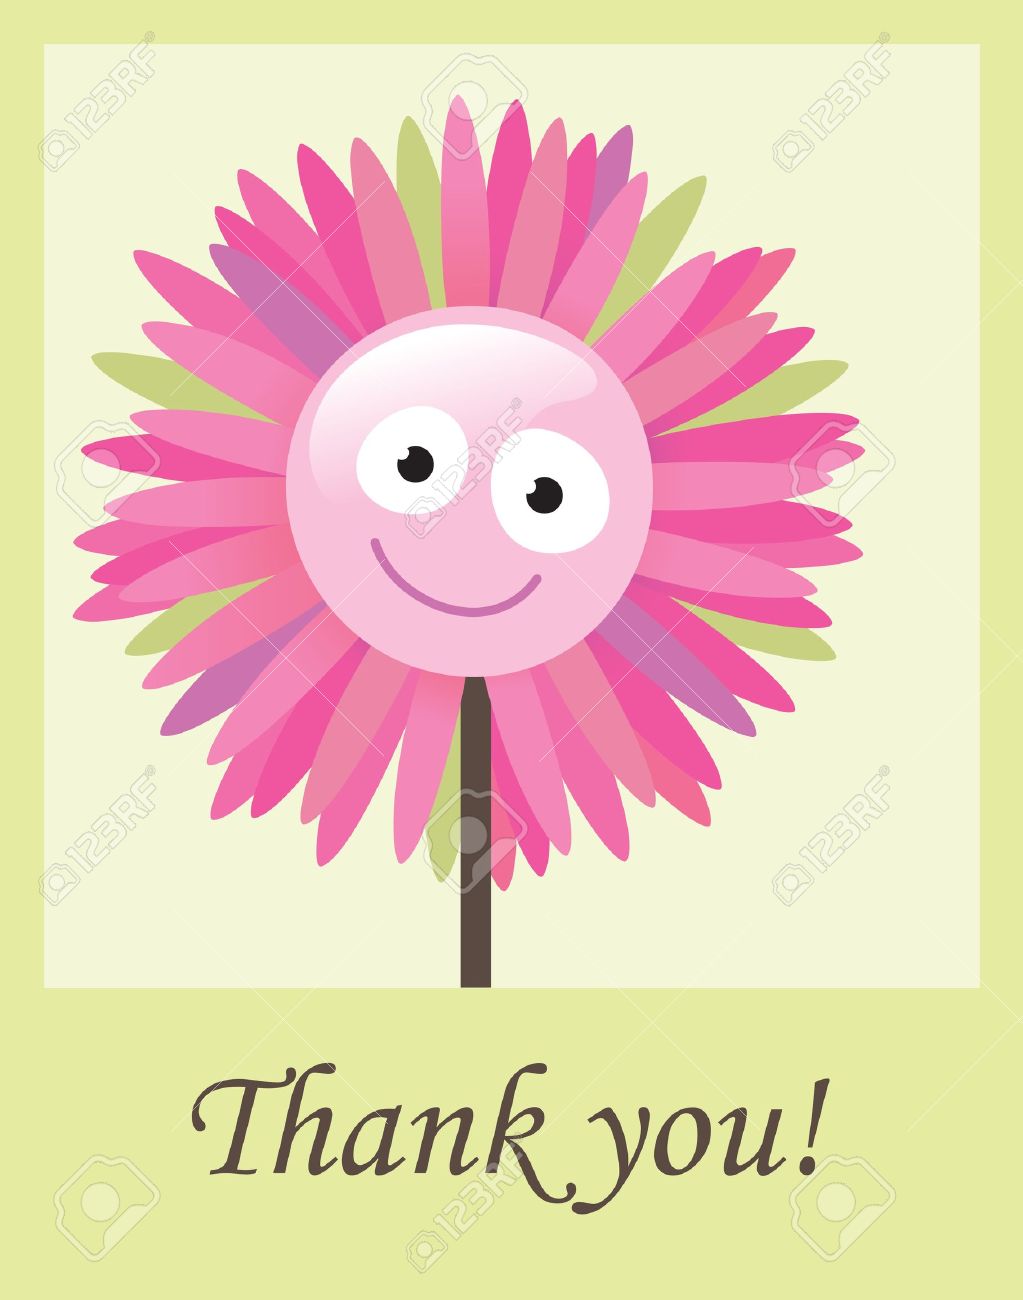 clip art thank you flowers - photo #10